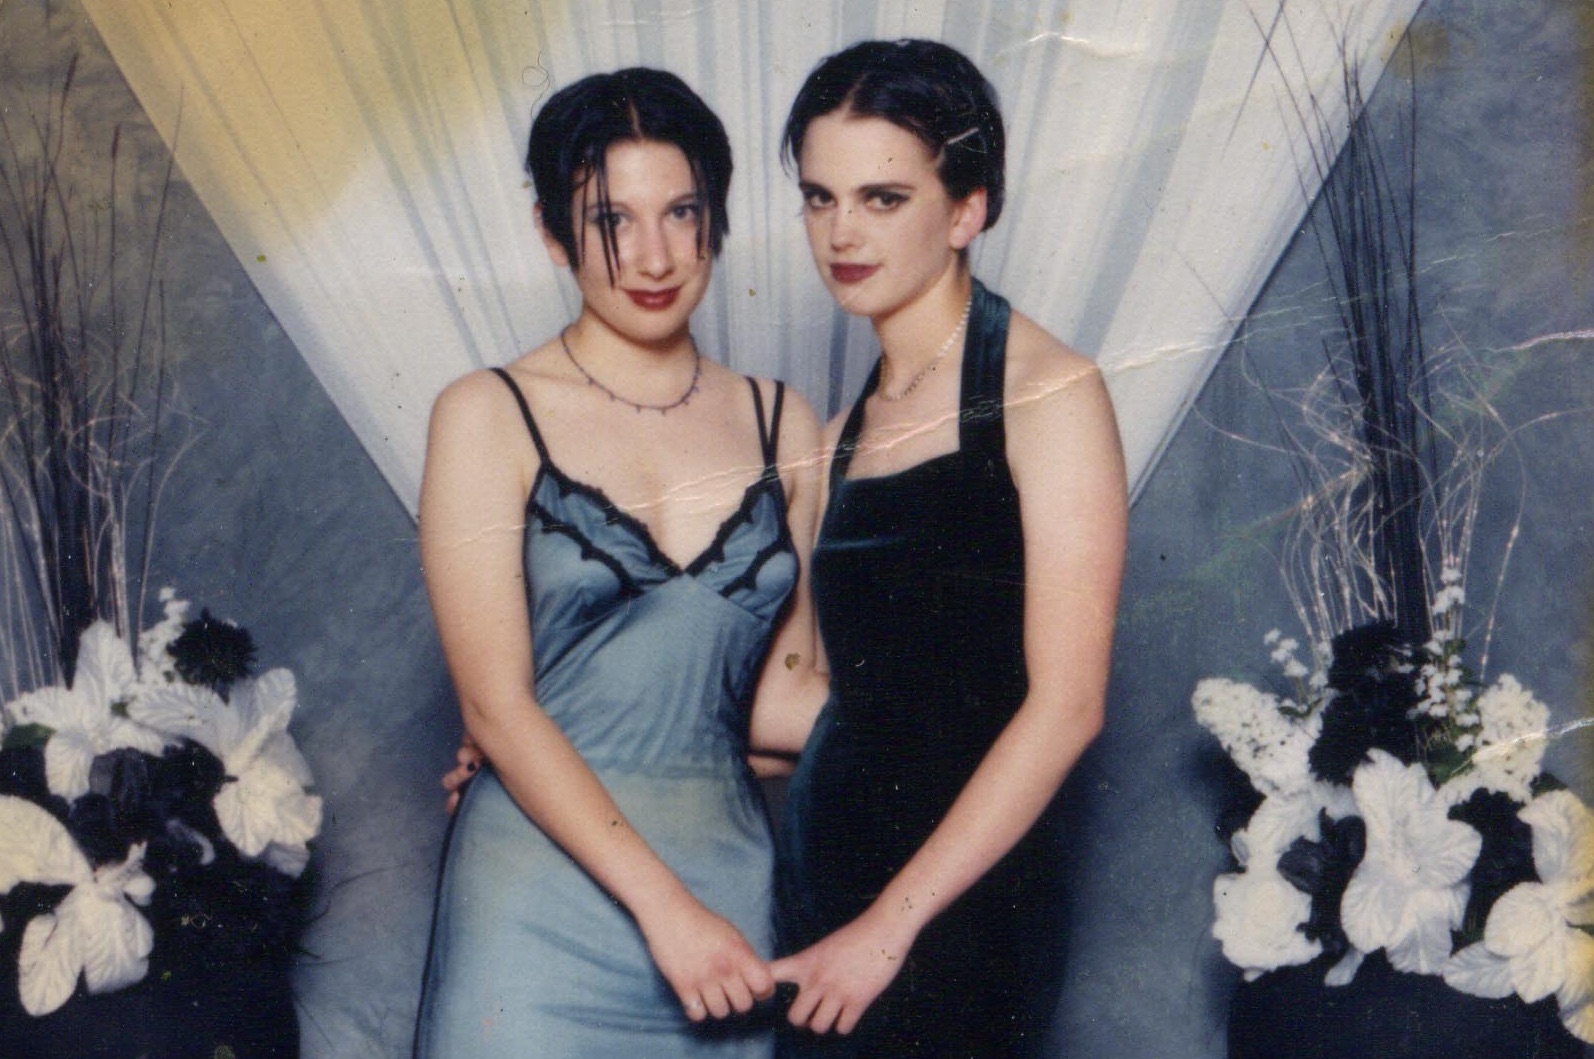 Lesbian Prom Gallery Heartwarming Photos Of Girls Taking Girls To Prom